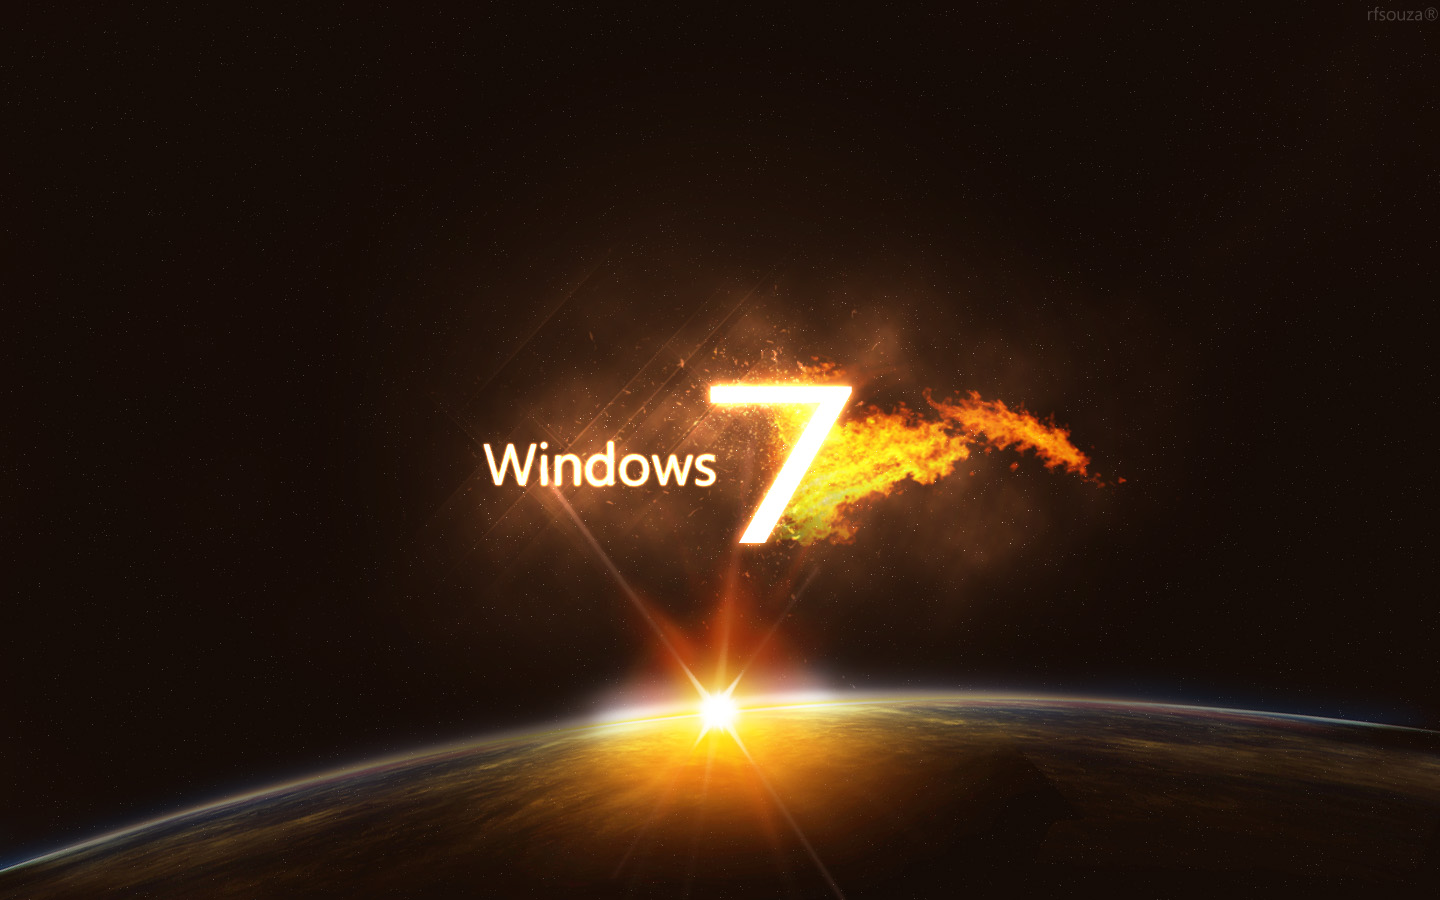 ... free-windowsstarter-edition-on-how-to-change-your-windows-7-wallpaper